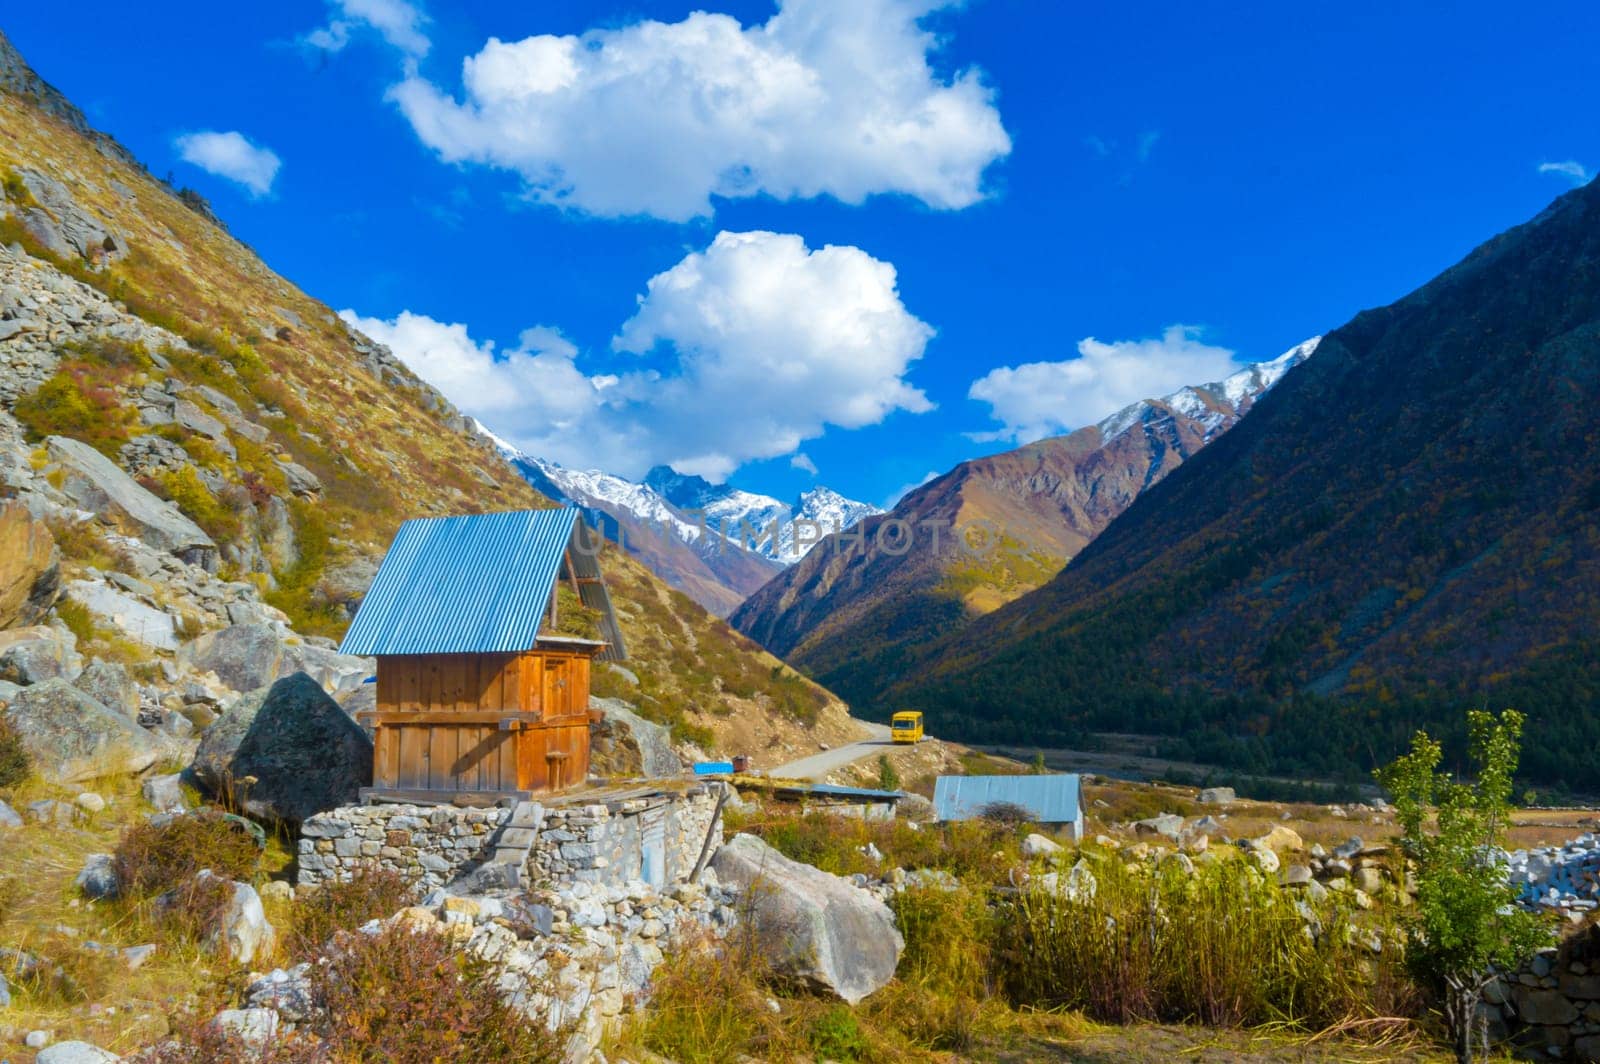 A small cabin room in a mountain valley against blue sky and flying clouds in the background. Chitkul Village Himachal Pradesh India South Asia Pacific